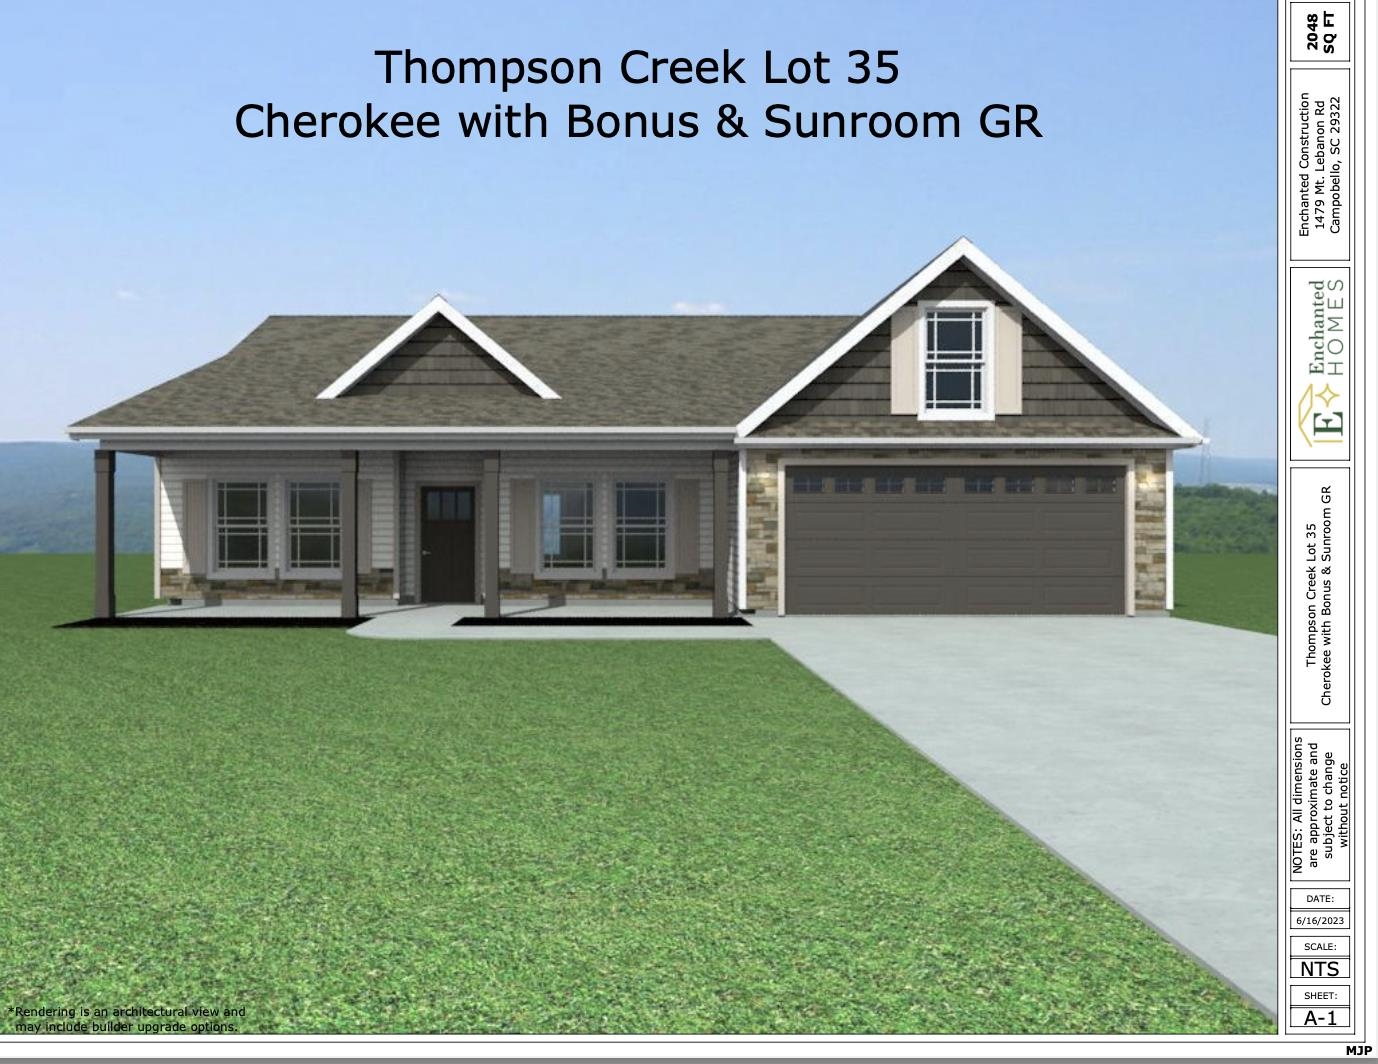 Preferred Lender/Attorney Closing Costs Incentive Offered! Welcome to Thompson Creek! The Cherokee plan offers a beautiful, modern layout. Split floor plan. Kitchen open to dining area. Home complete with builder trademark chair rail, crown molding, and rope lighting. Luxury Vinyl Plank/Tile flooring in all areas with exception of carpet in bedrooms.  Covered 12x12 back patio. Granite counters throughout.  Lot 35